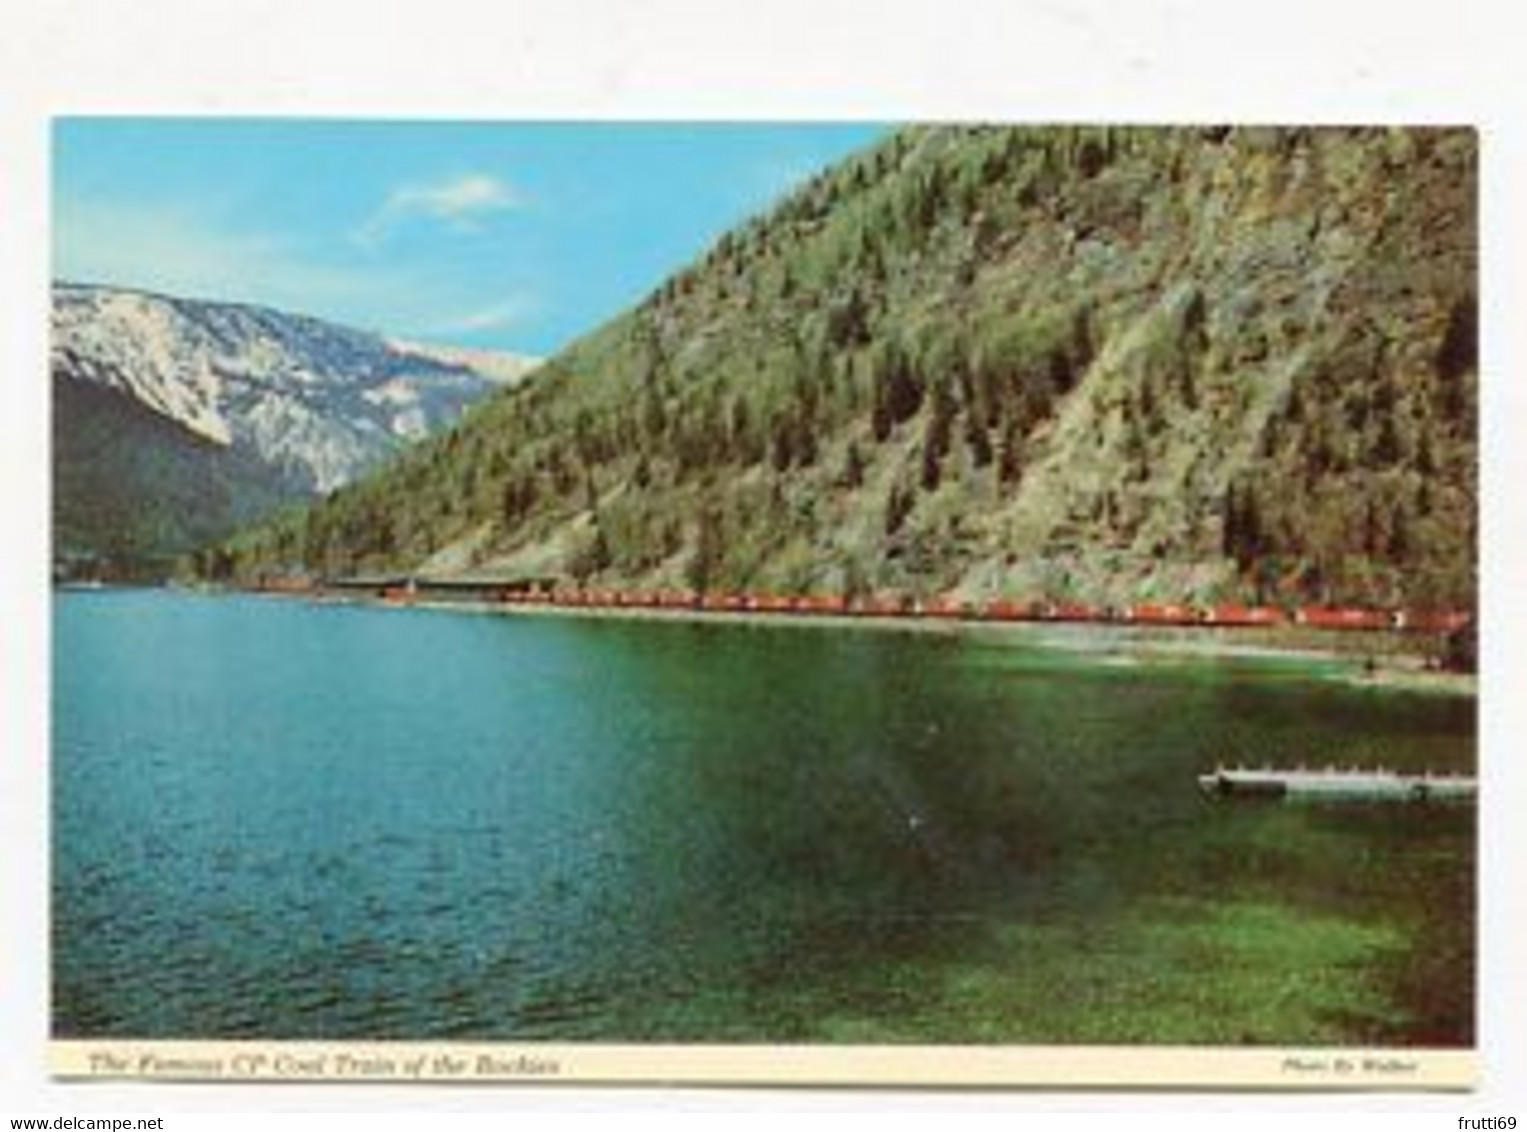 AK 09917 CANADA - The Famous CP Coal Train Of The Rockies - Cartes Modernes